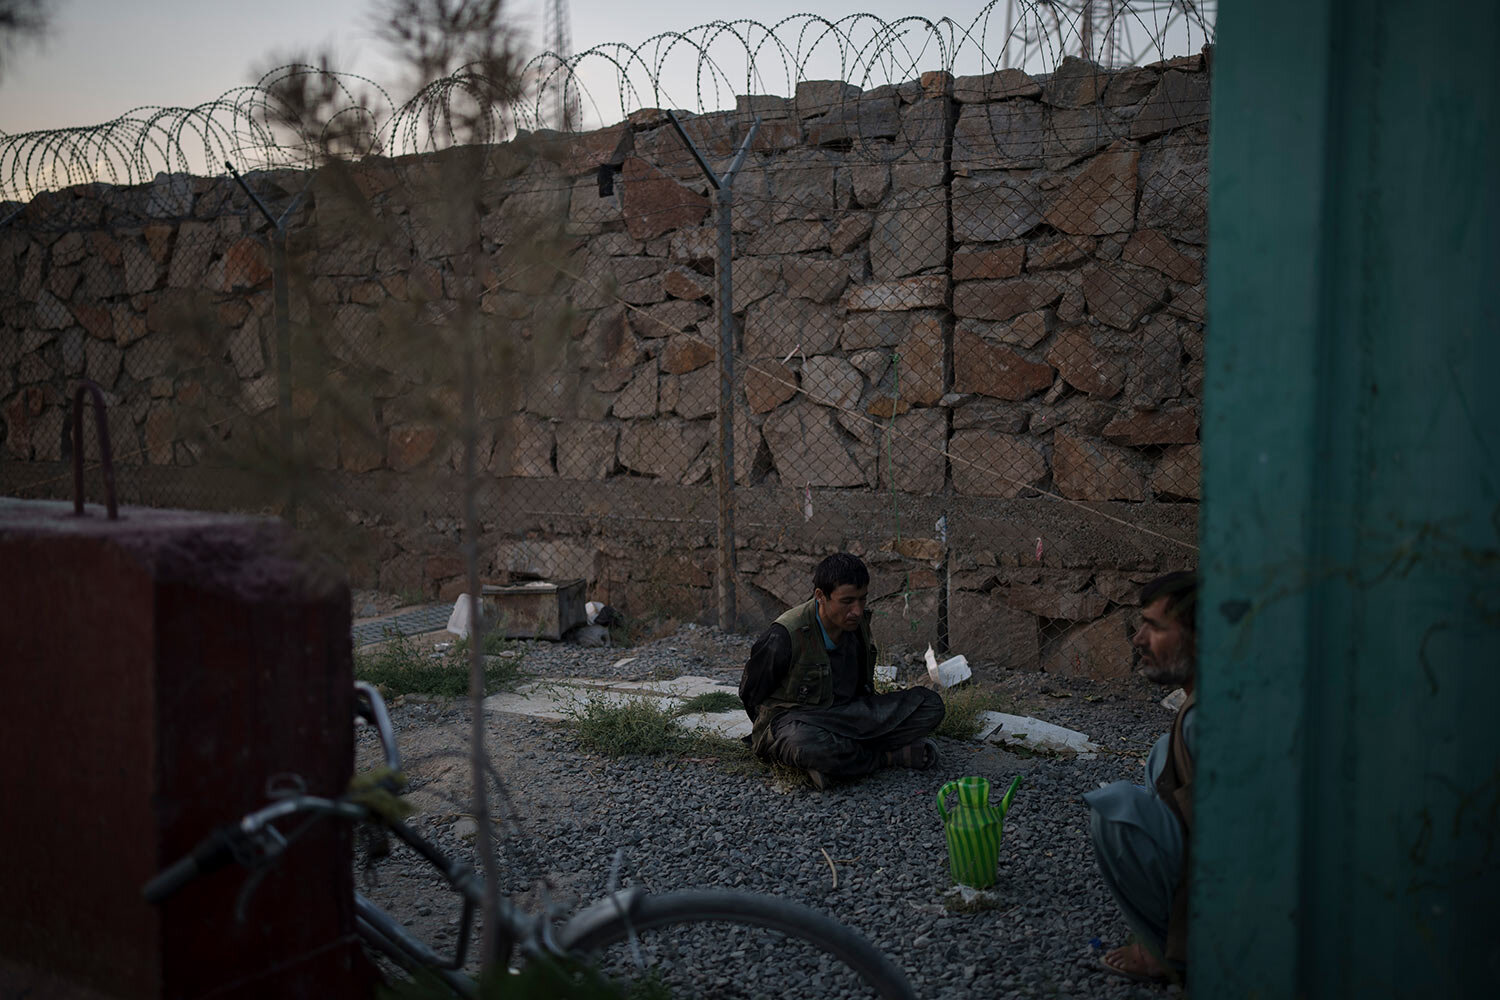  Two men detained by Taliban fighters sit at the entrance of a police station in Kabul, Afghanistan, Tuesday, Sept. 21, 2021. (AP Photo/Felipe Dana)  